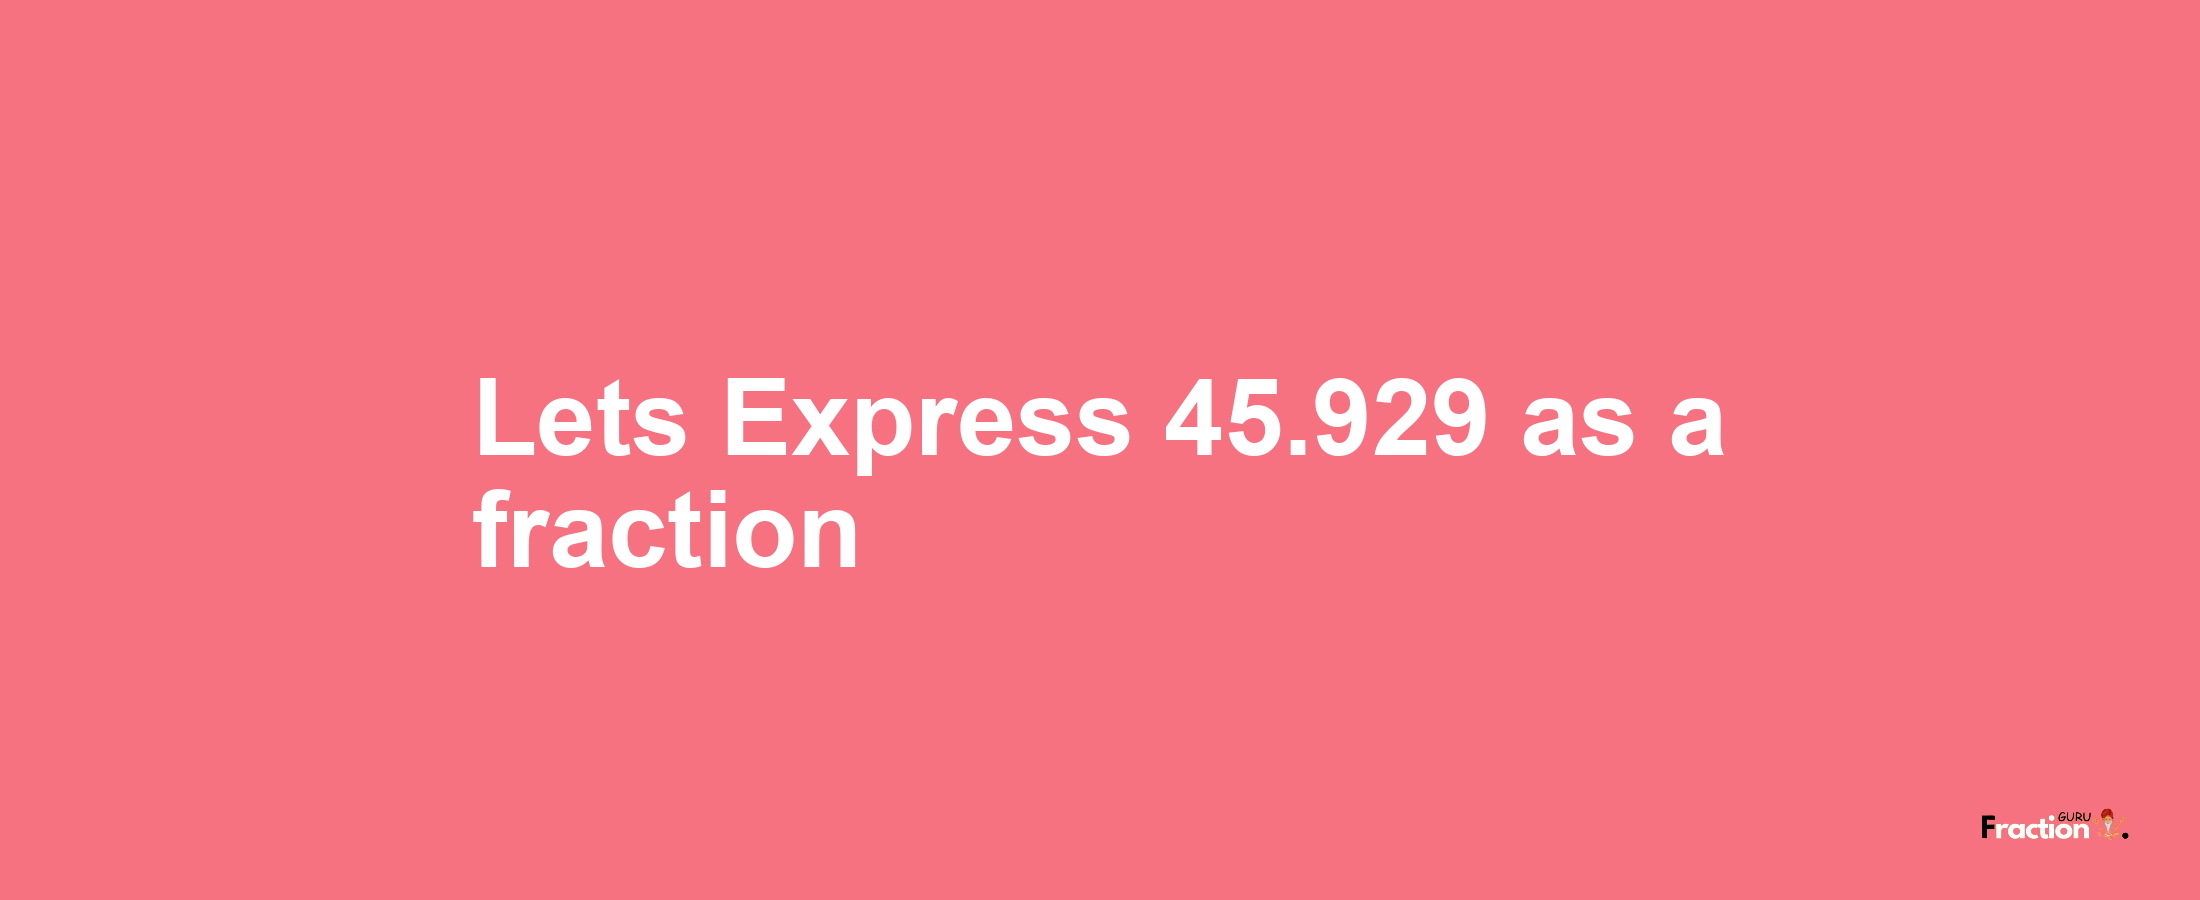 Lets Express 45.929 as afraction